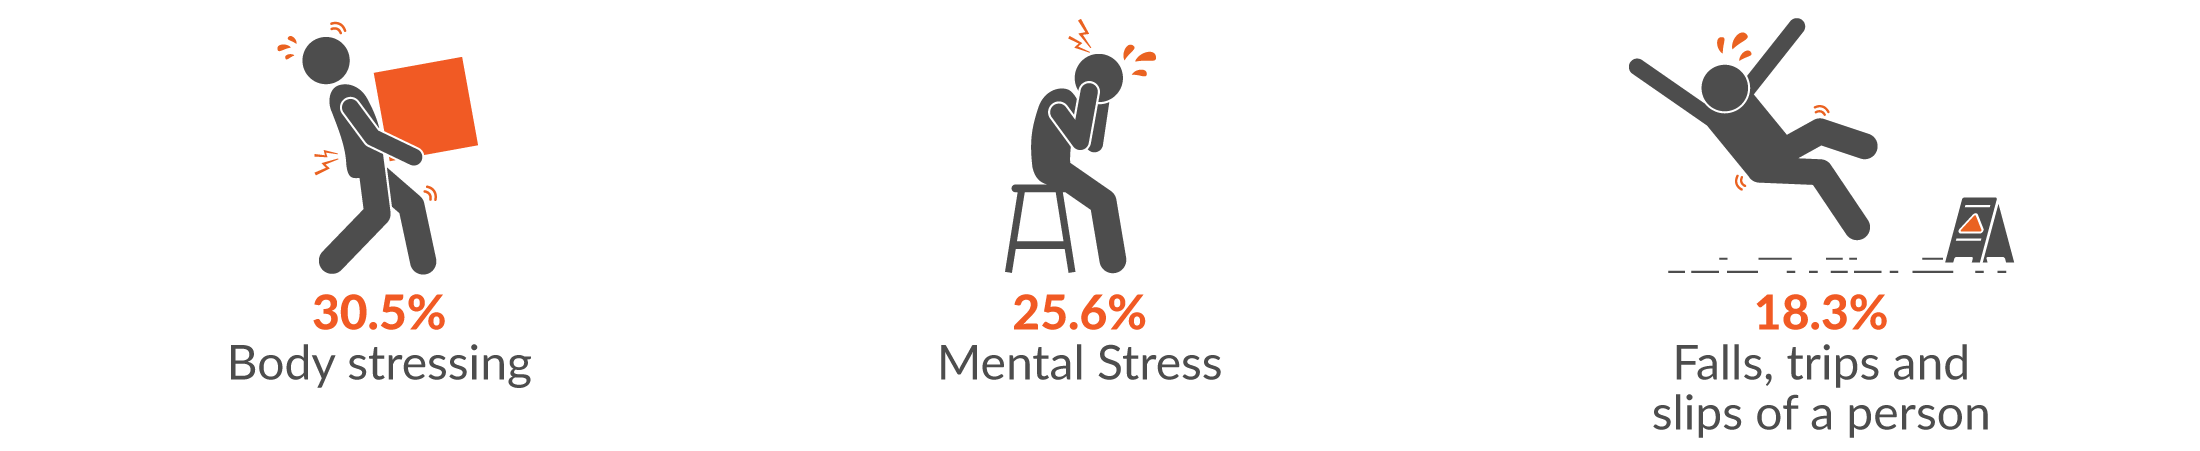 This infographic shows the main three mechanisms of serious injury for Government administration & defence claims were 30.5% body stressing; 25.6% mental stress; and 18.3% falls, trips and slips of a person.